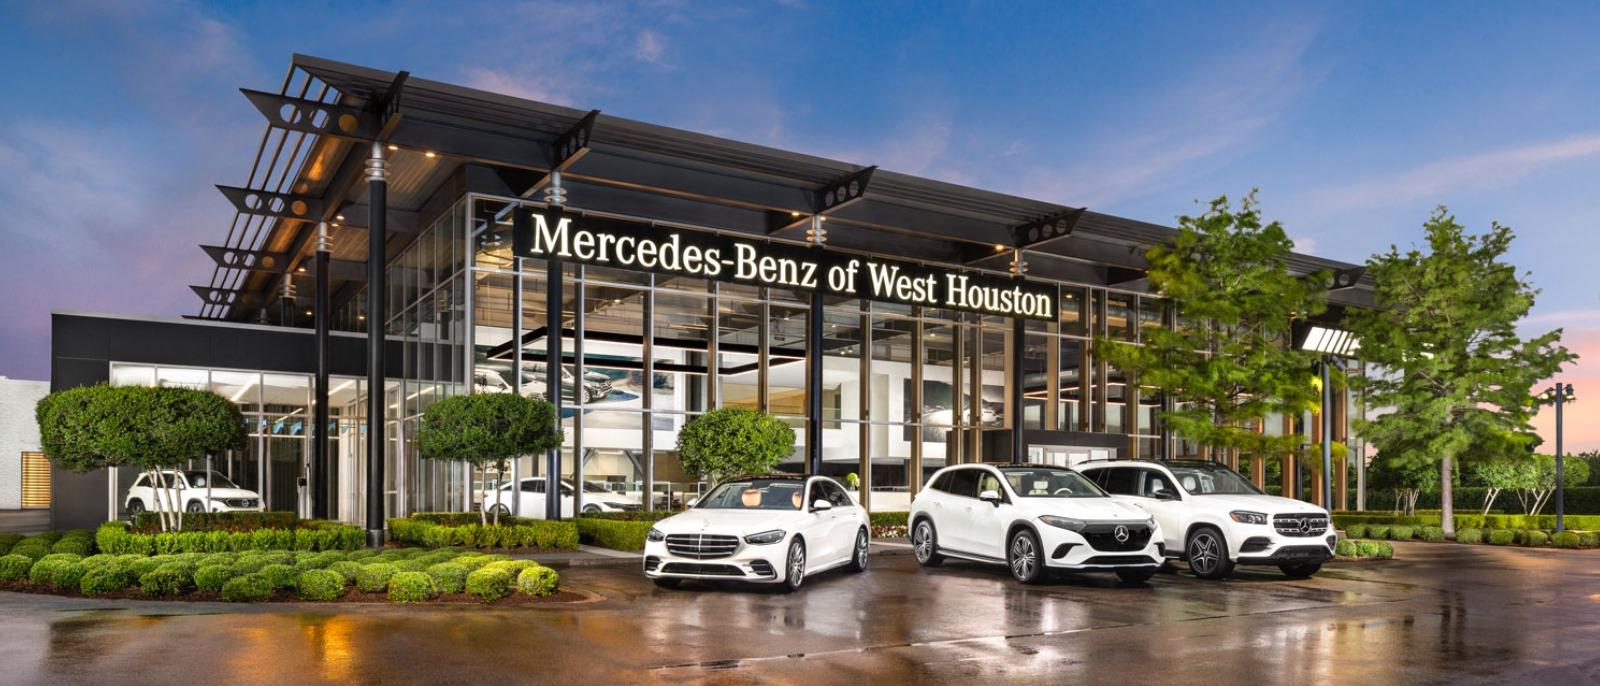 Sewell Mercedes Benz Collision Center of West Houston